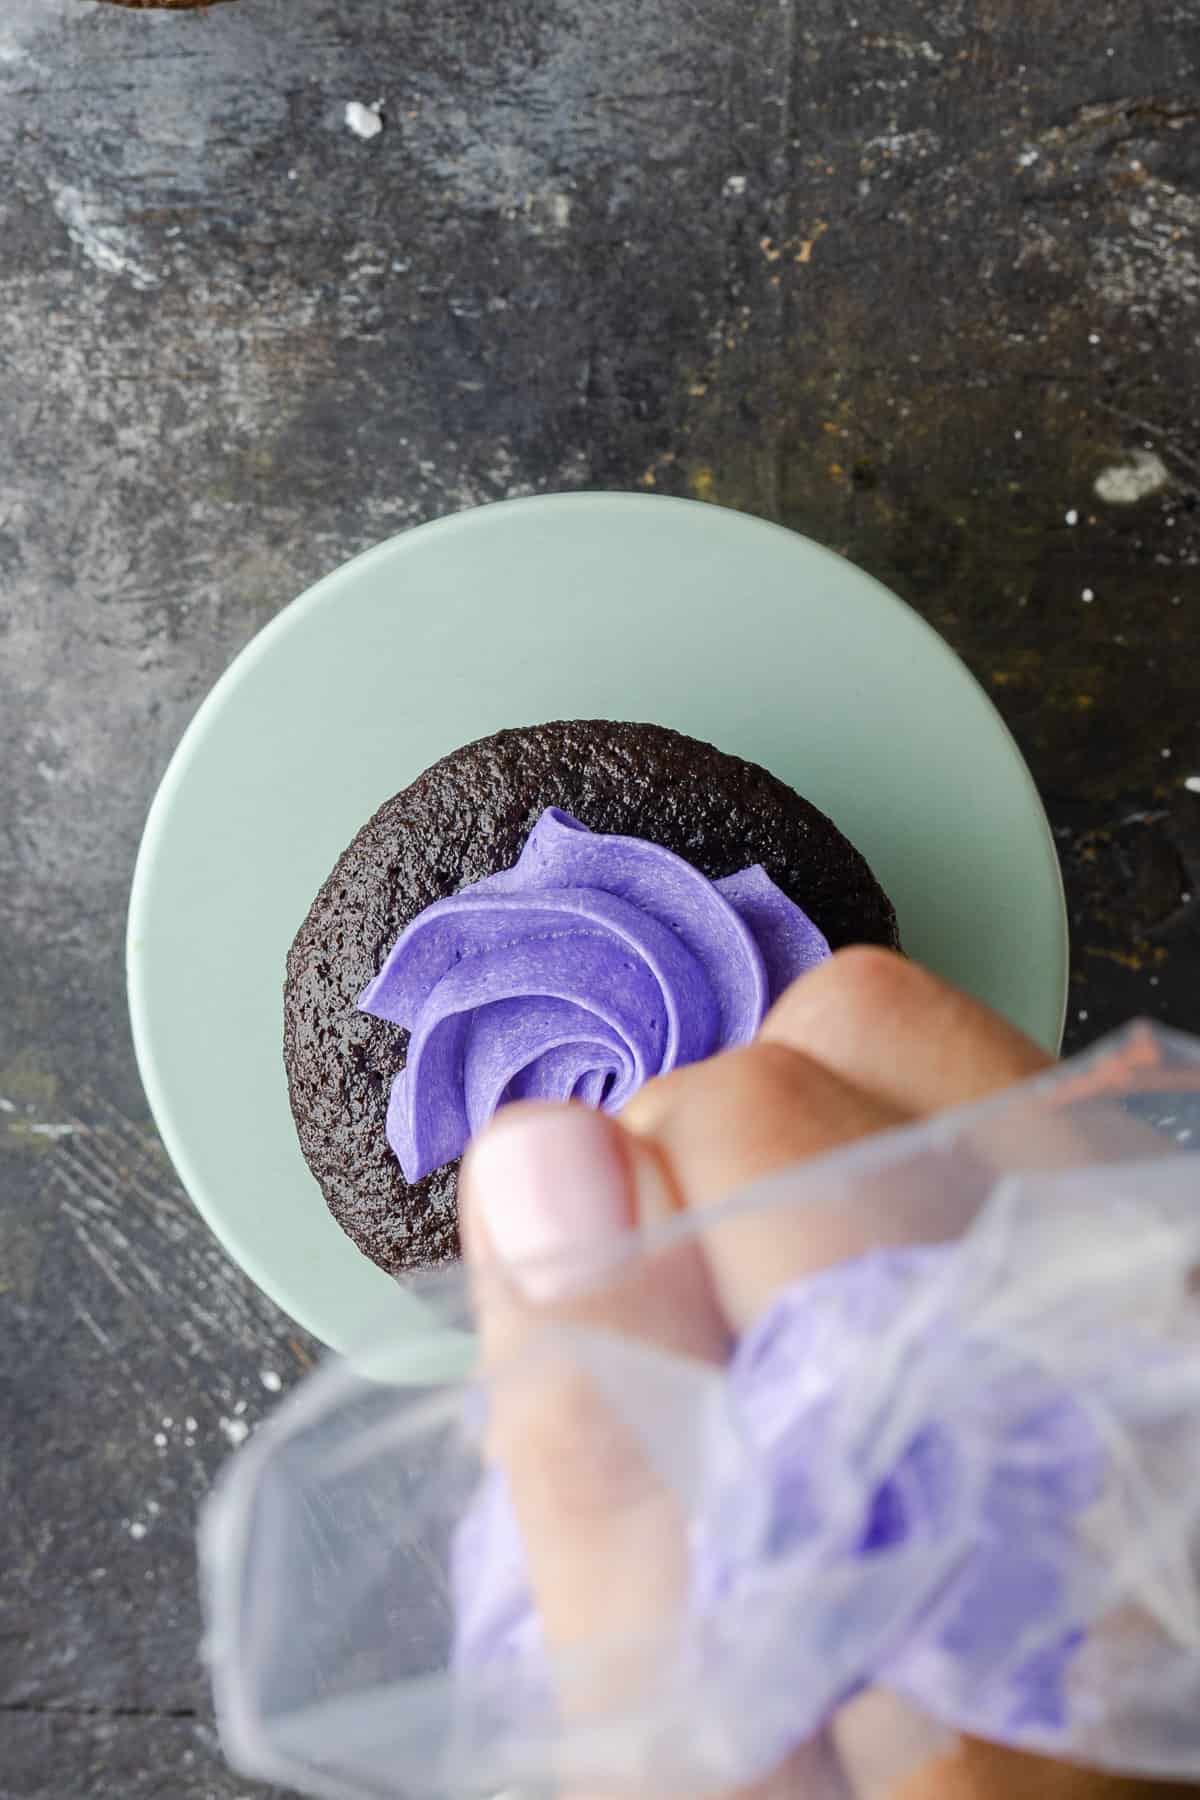 A hand piping a swirl of purple buttercream frosting onto a chocolate cupcake.